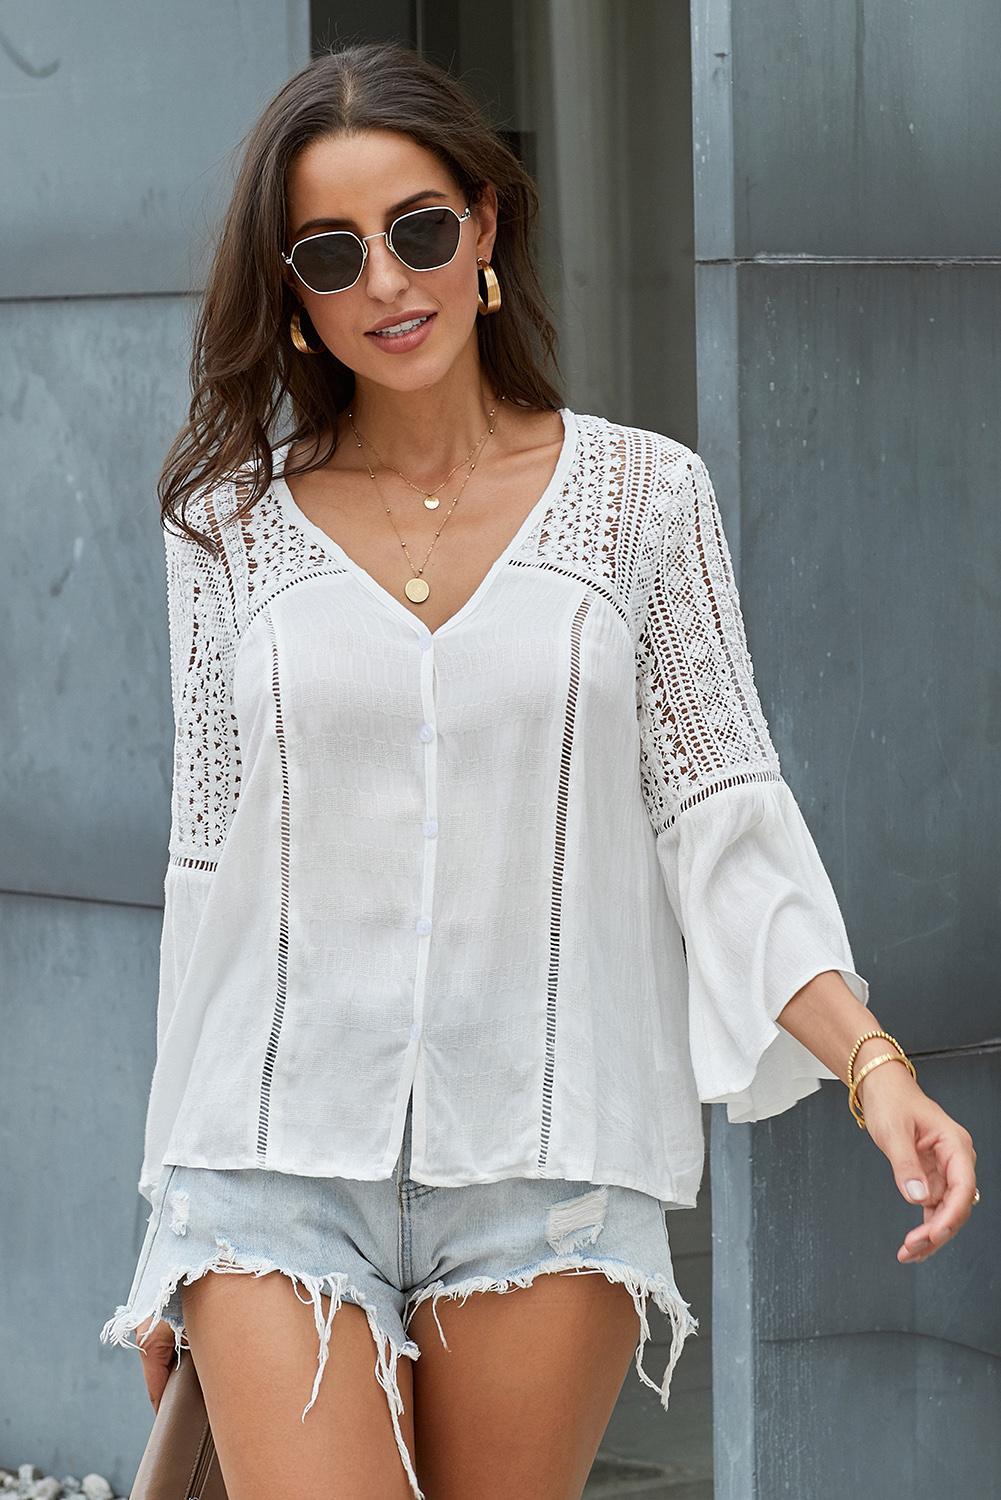 Plus Size So Chic - So Chic Boho Blouse In White